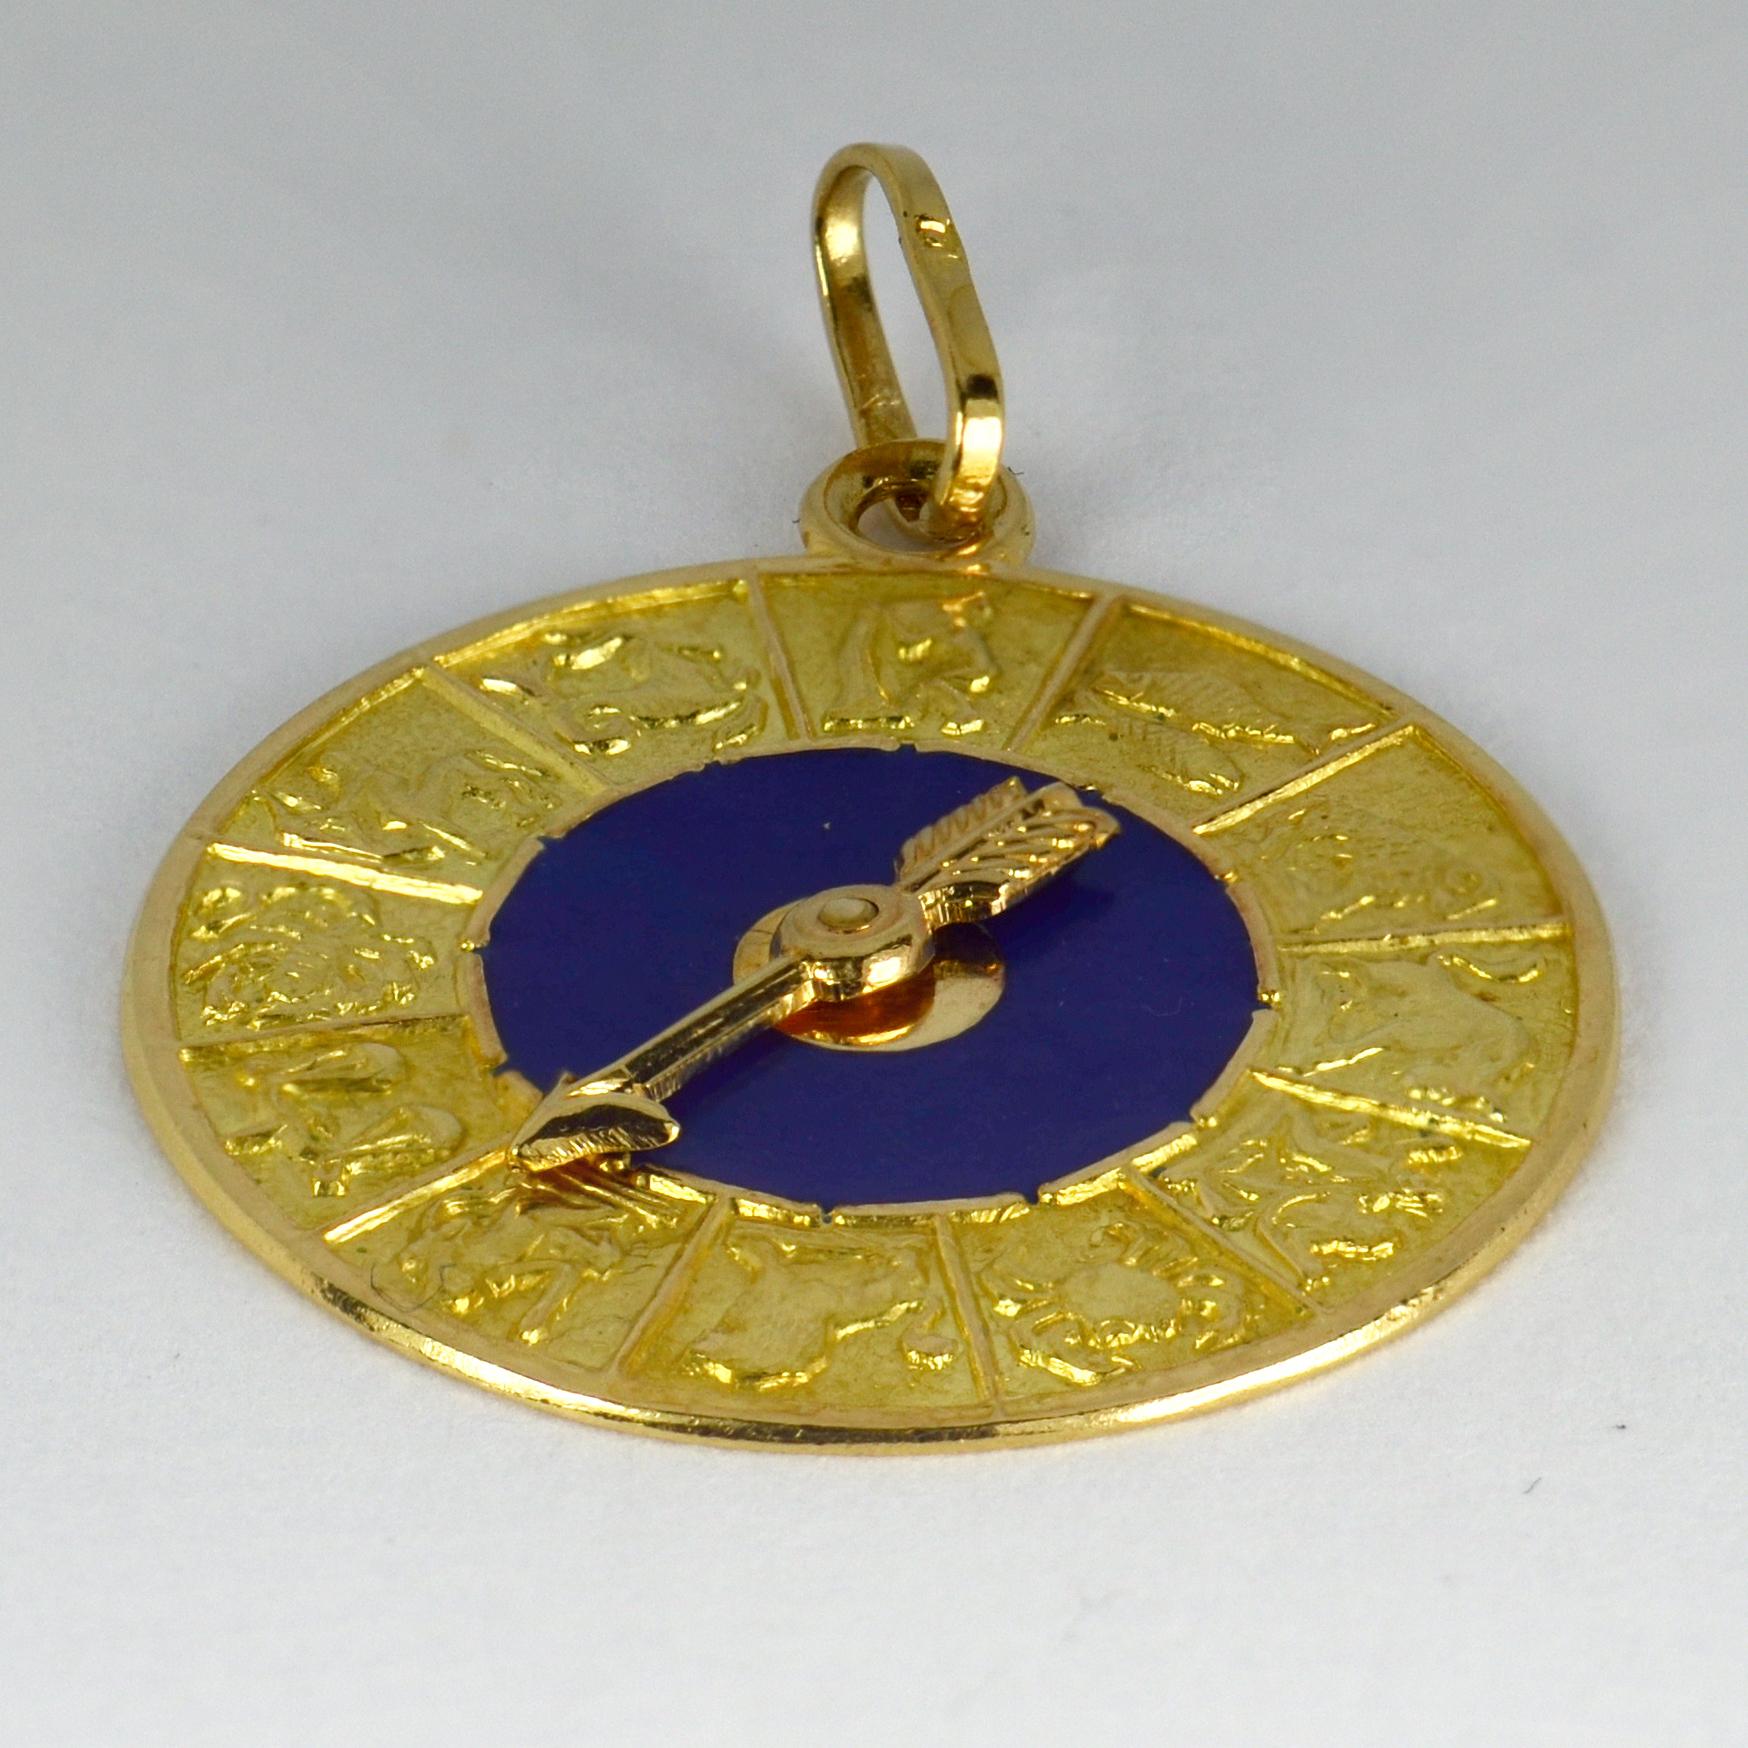 An 18 karat (18K) yellow gold and blue enamel charm pendant designed as a disc with a spinning arrow to point at one of the twelve starsigns of the Zodiac depicted around the edge. Stamped 750 for 18 karat gold and an unknown Italian maker’s